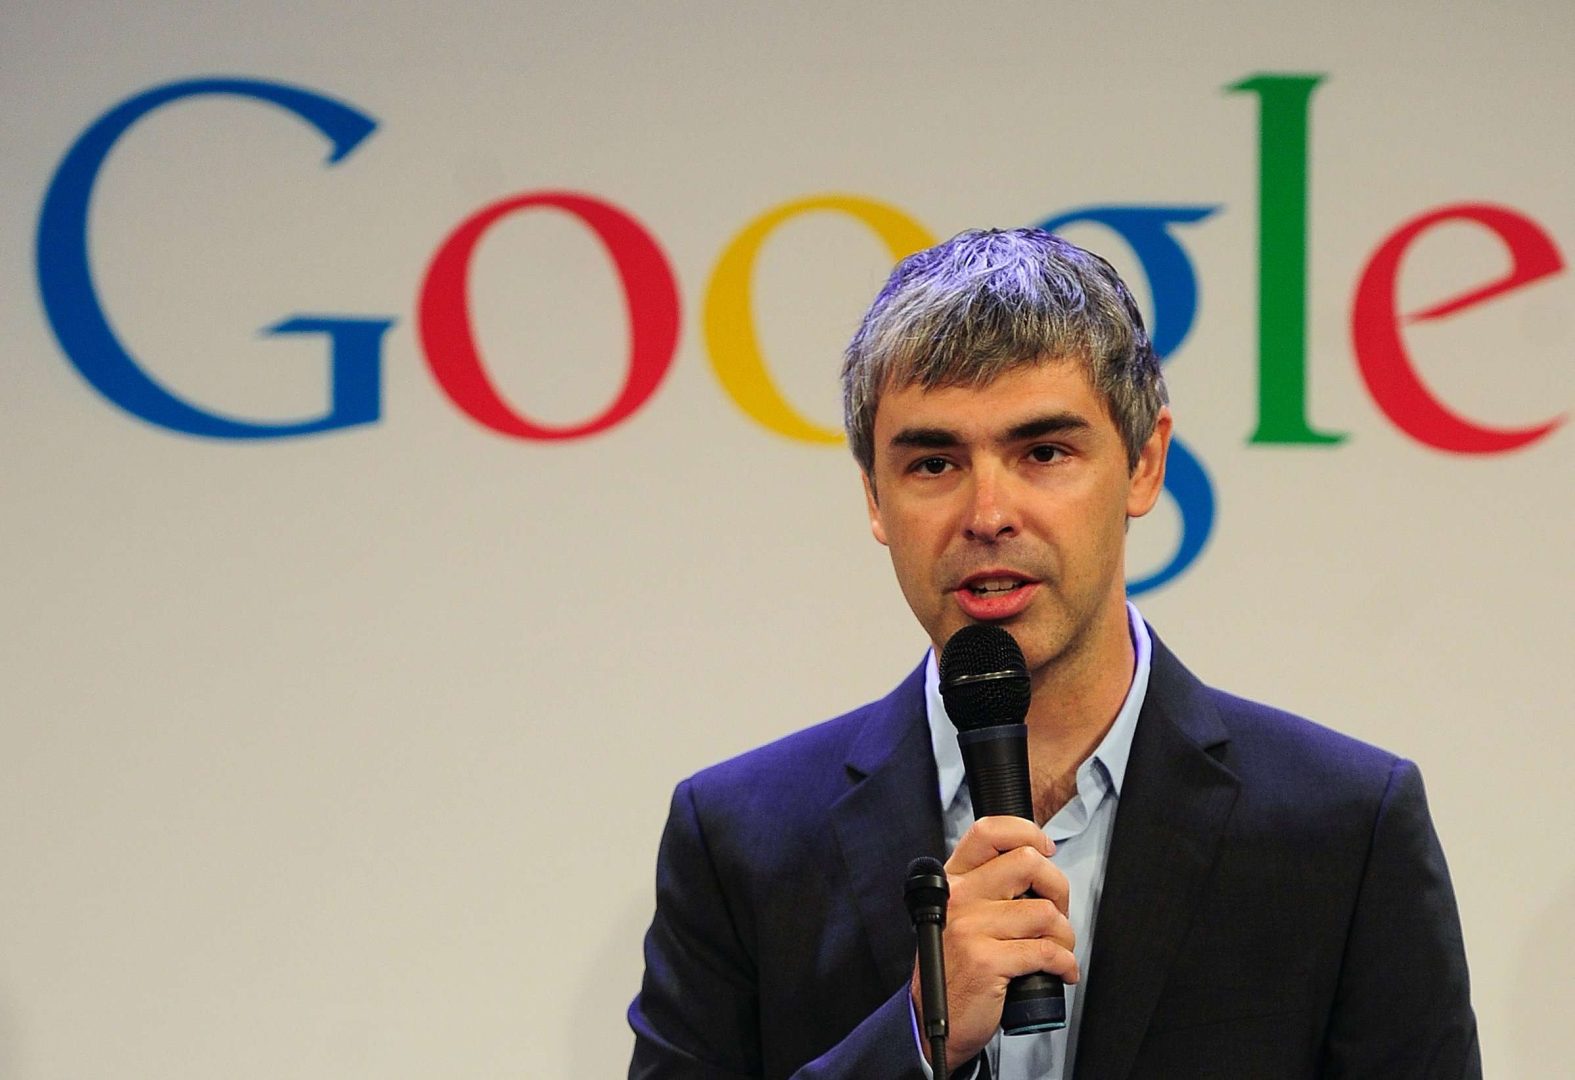 Larry Page Former CEO of Google